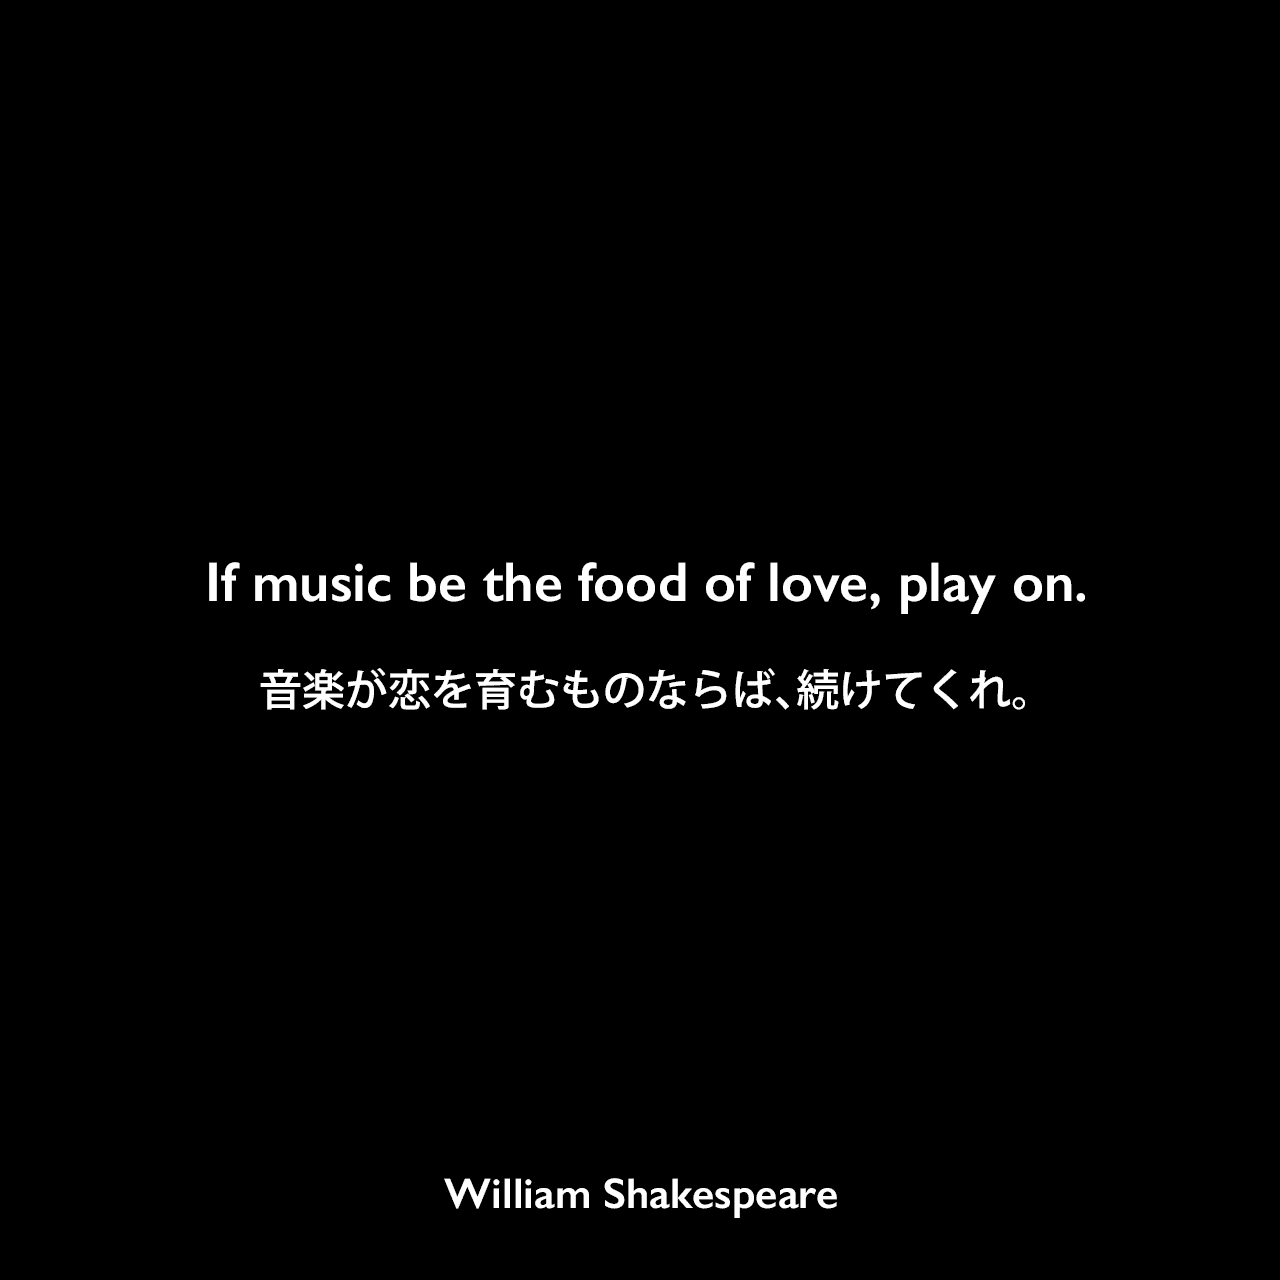 If music be the food of love, play on.音楽が恋を育むものならば、続けてくれ。William Shakespeare